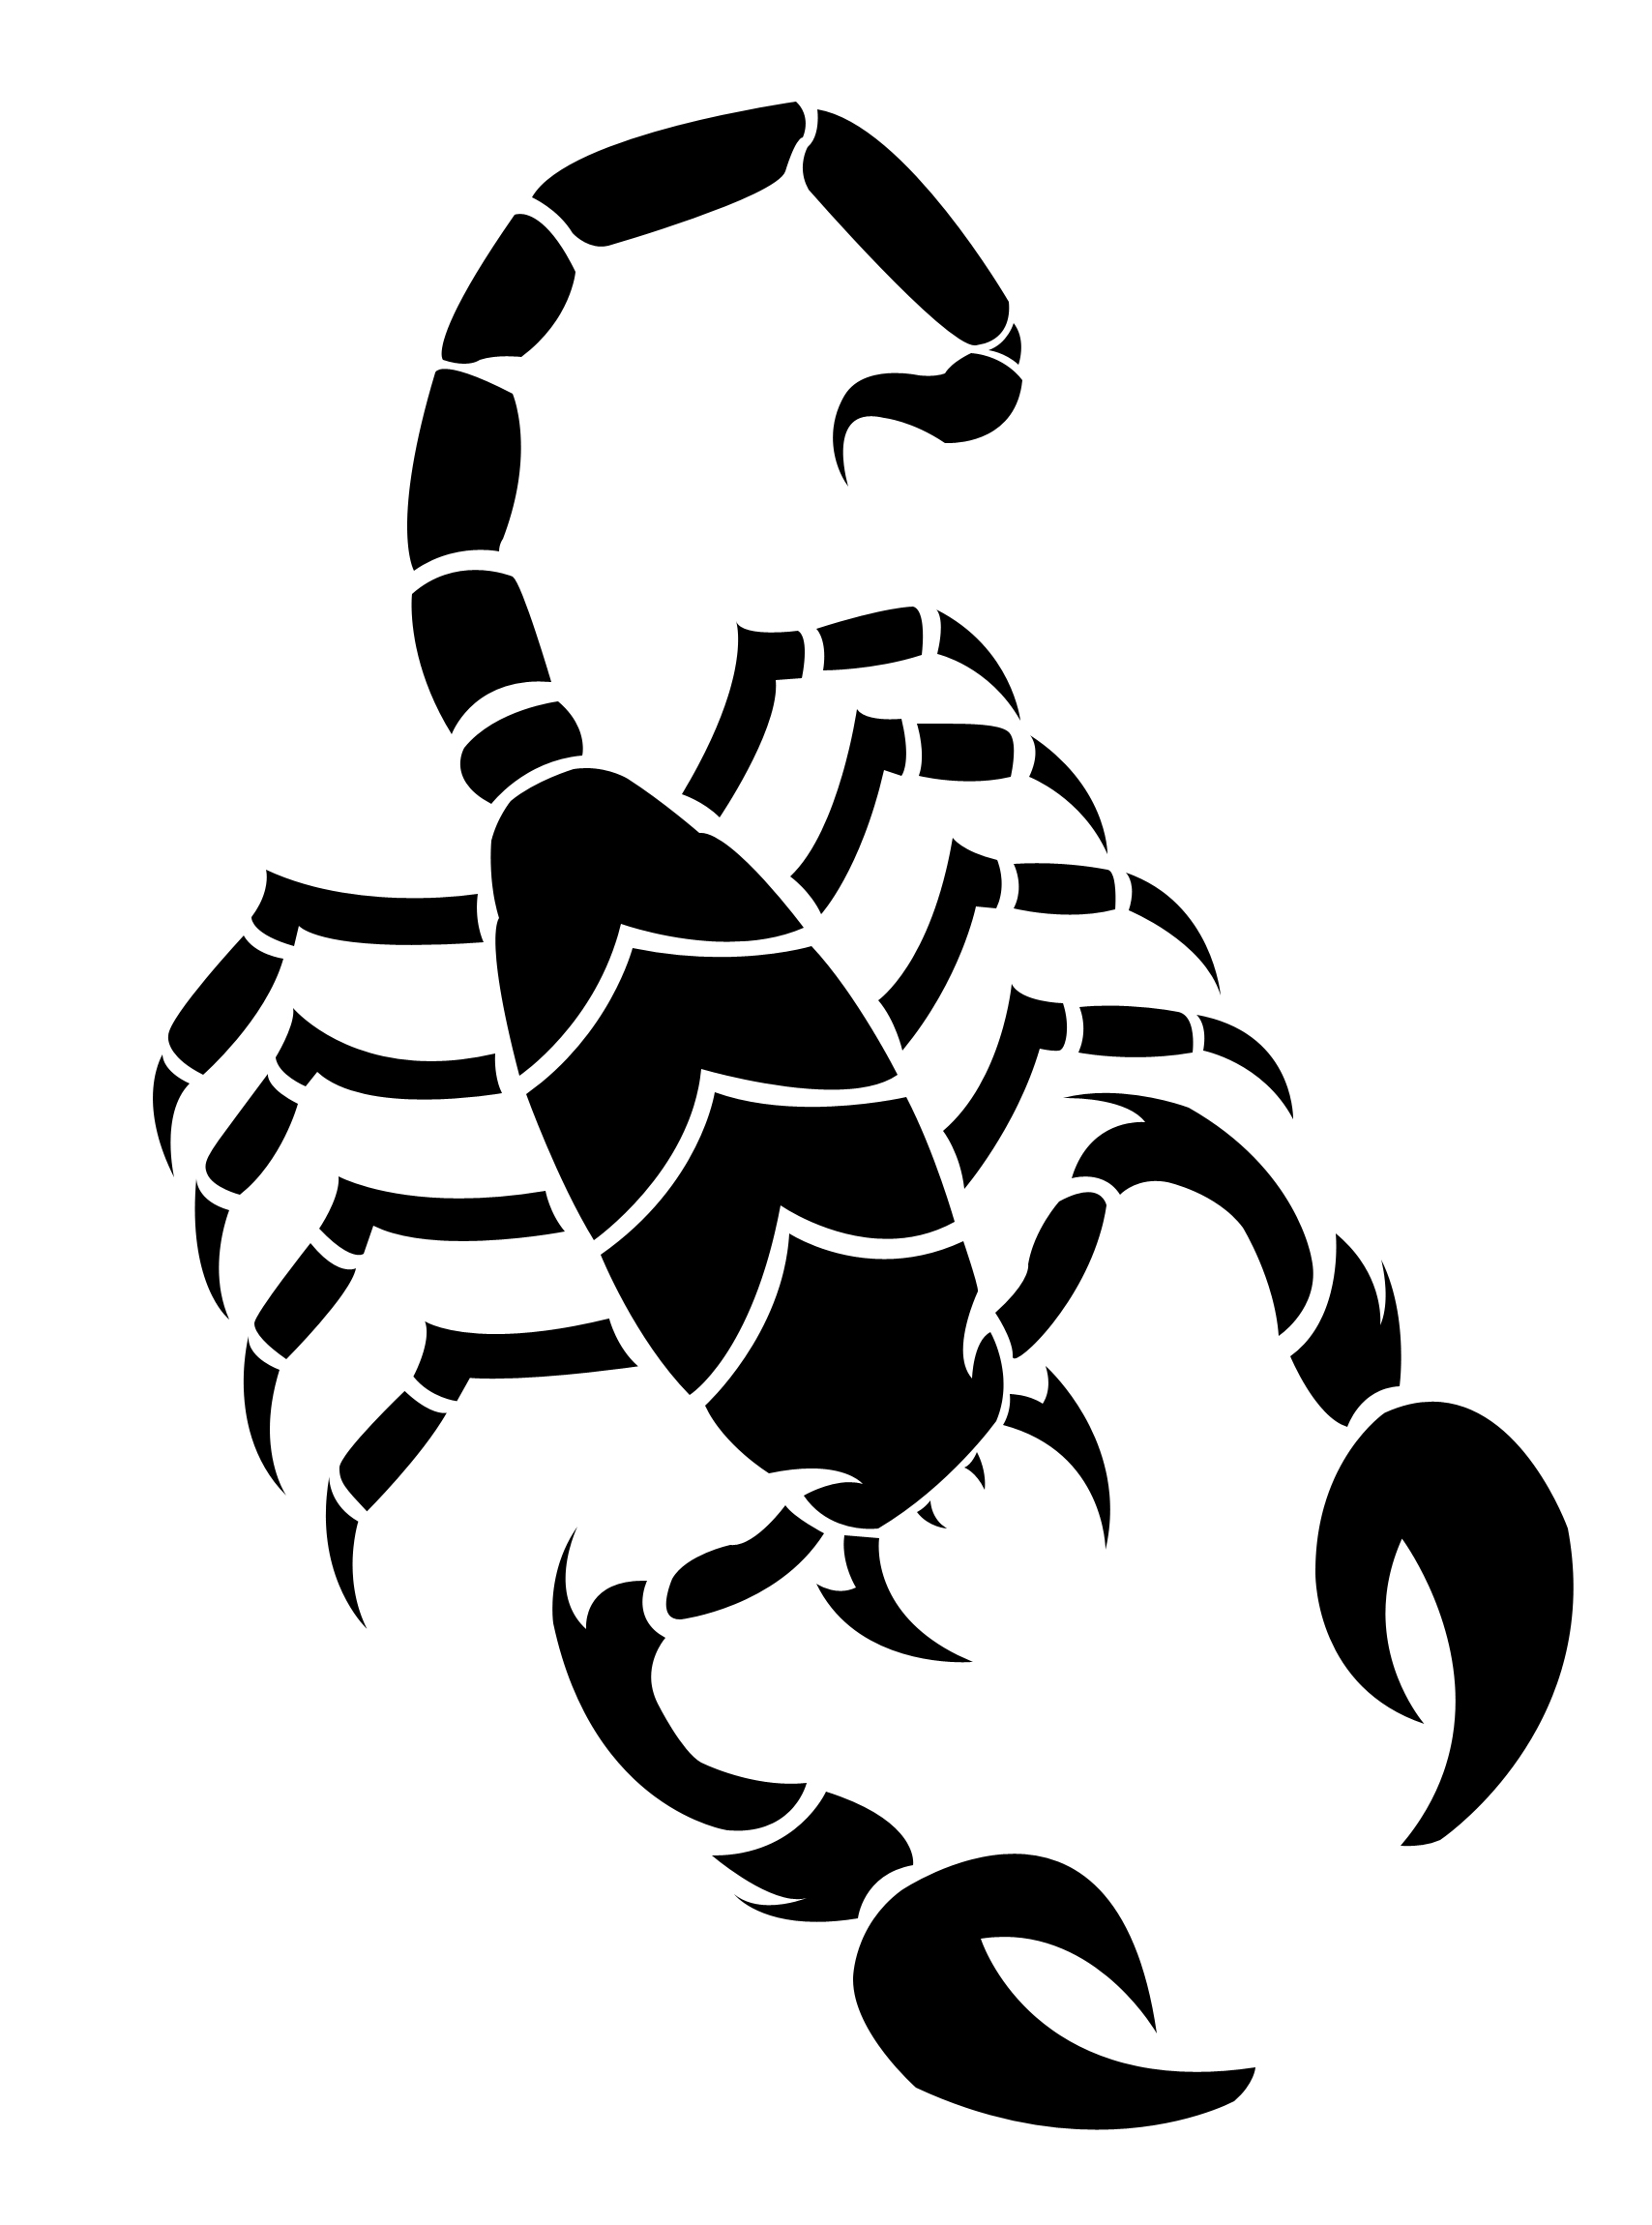 Scorpion Drawing - Clipart library